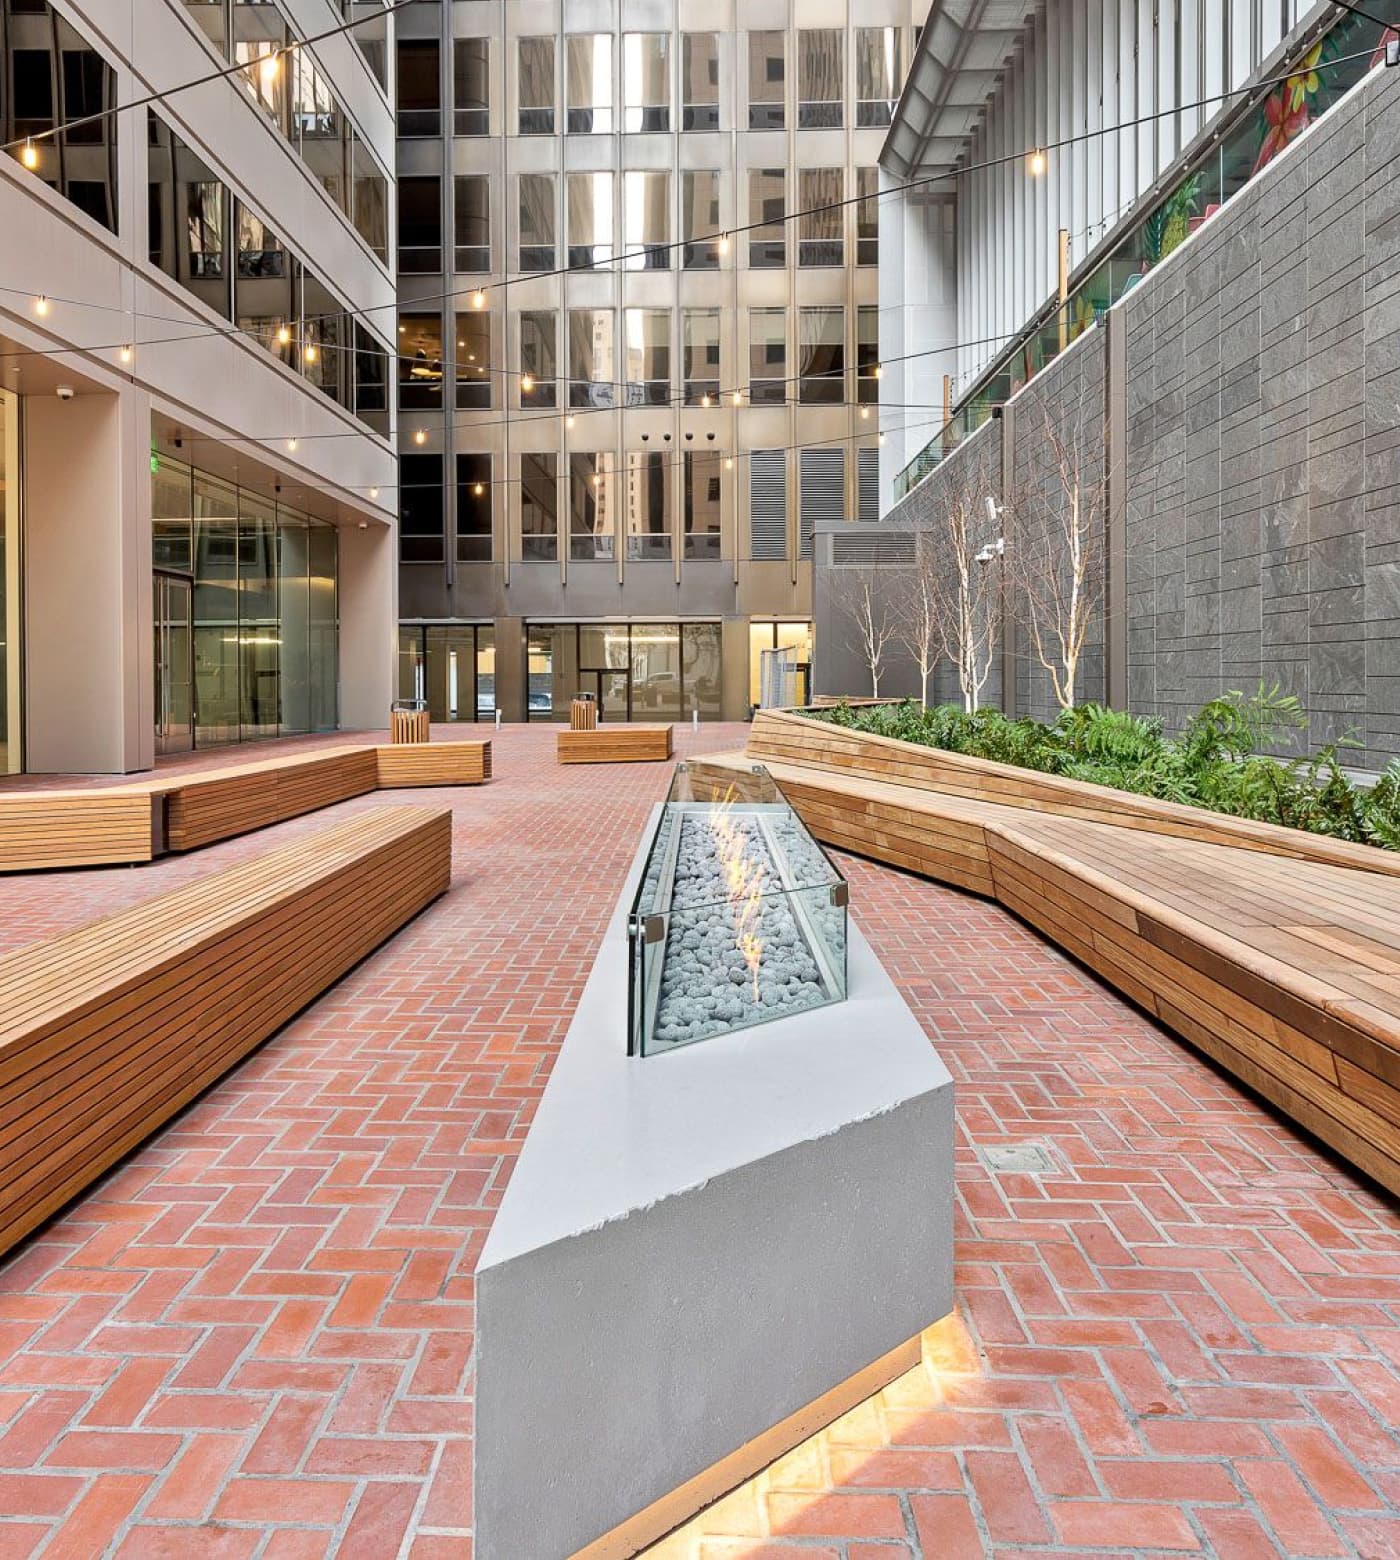 A view of the 45 Fremont outdoor courtyard with fire pit and benches